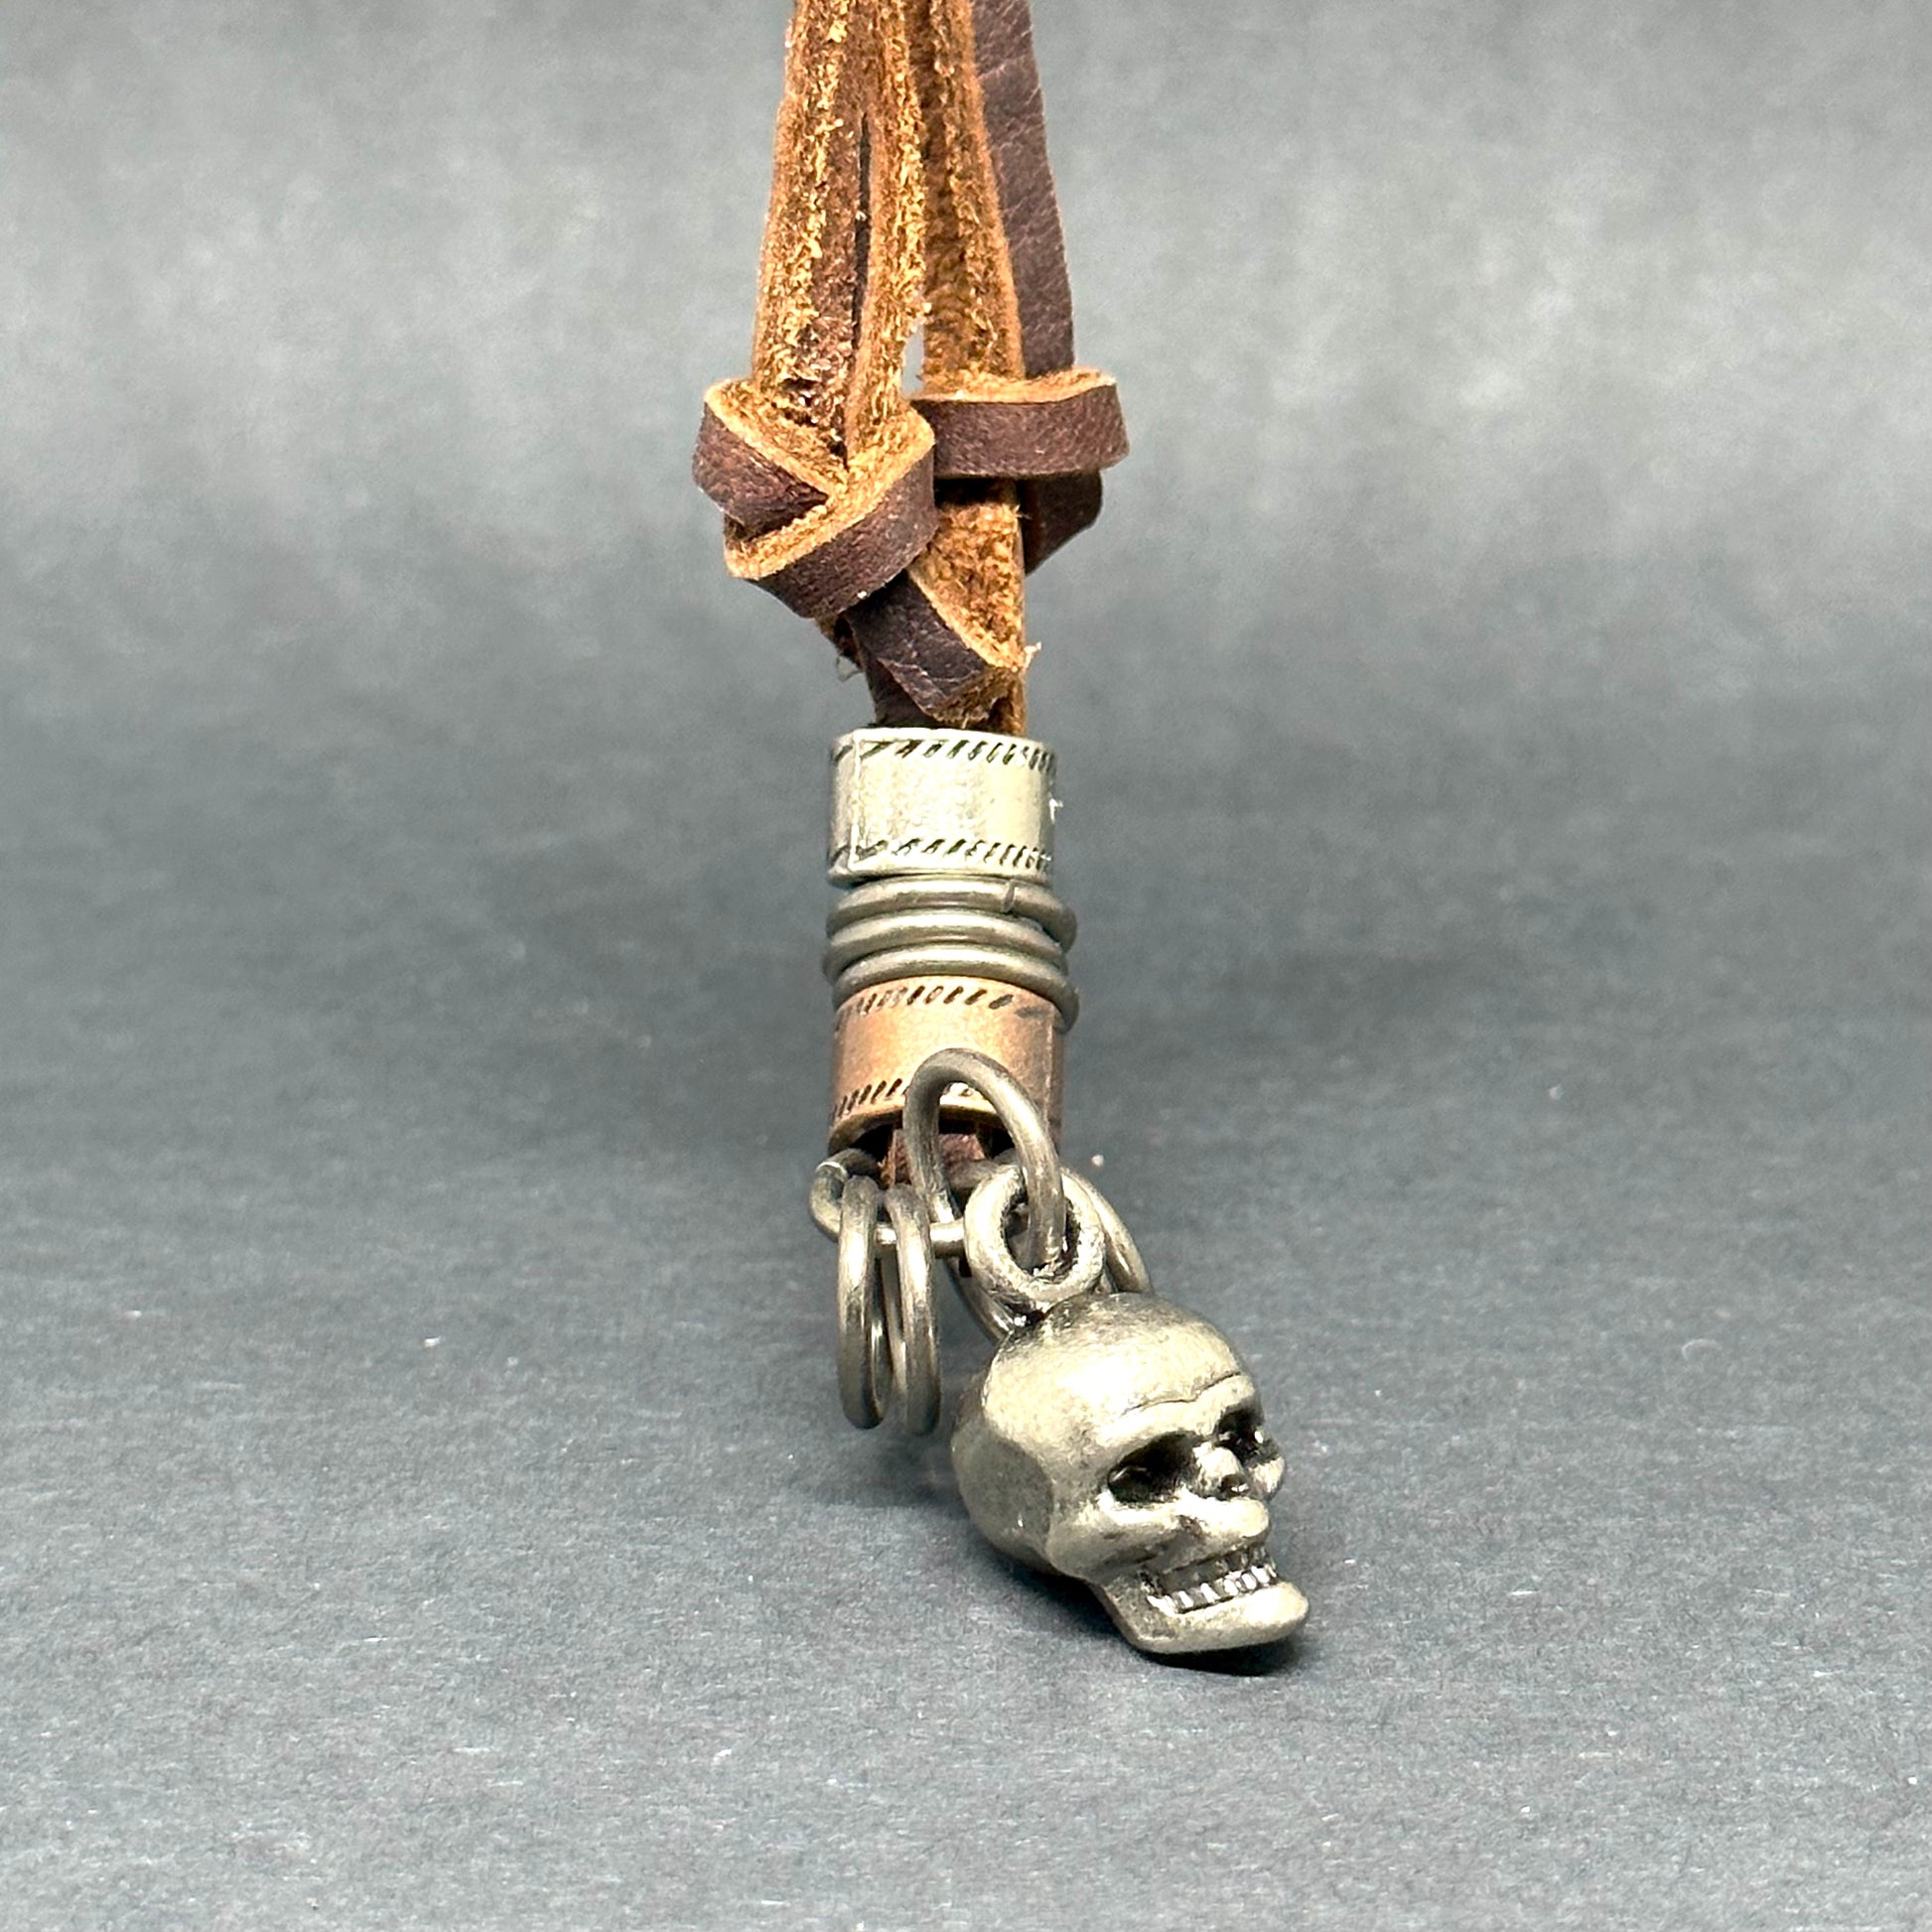 Metallic skull pendant charm with stainless stain rings and disk. Brown leather necklace cord for guys.